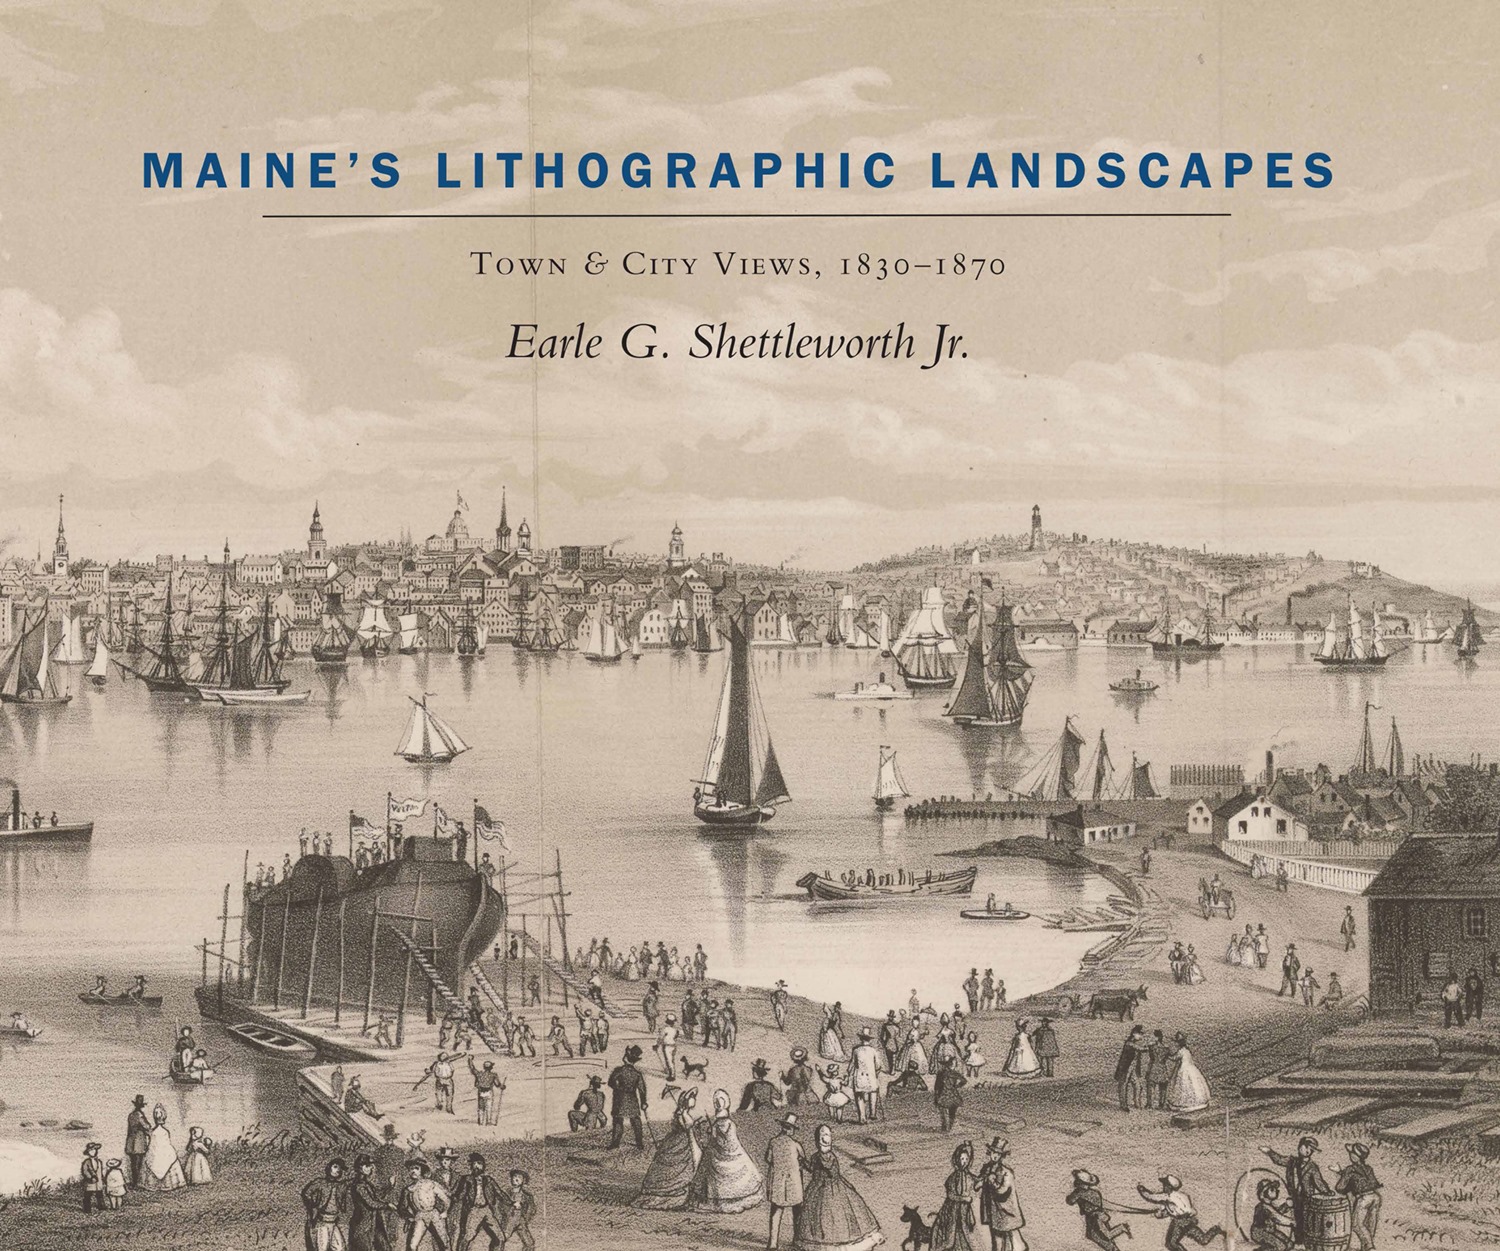 Maine's Lithographic Landscapes